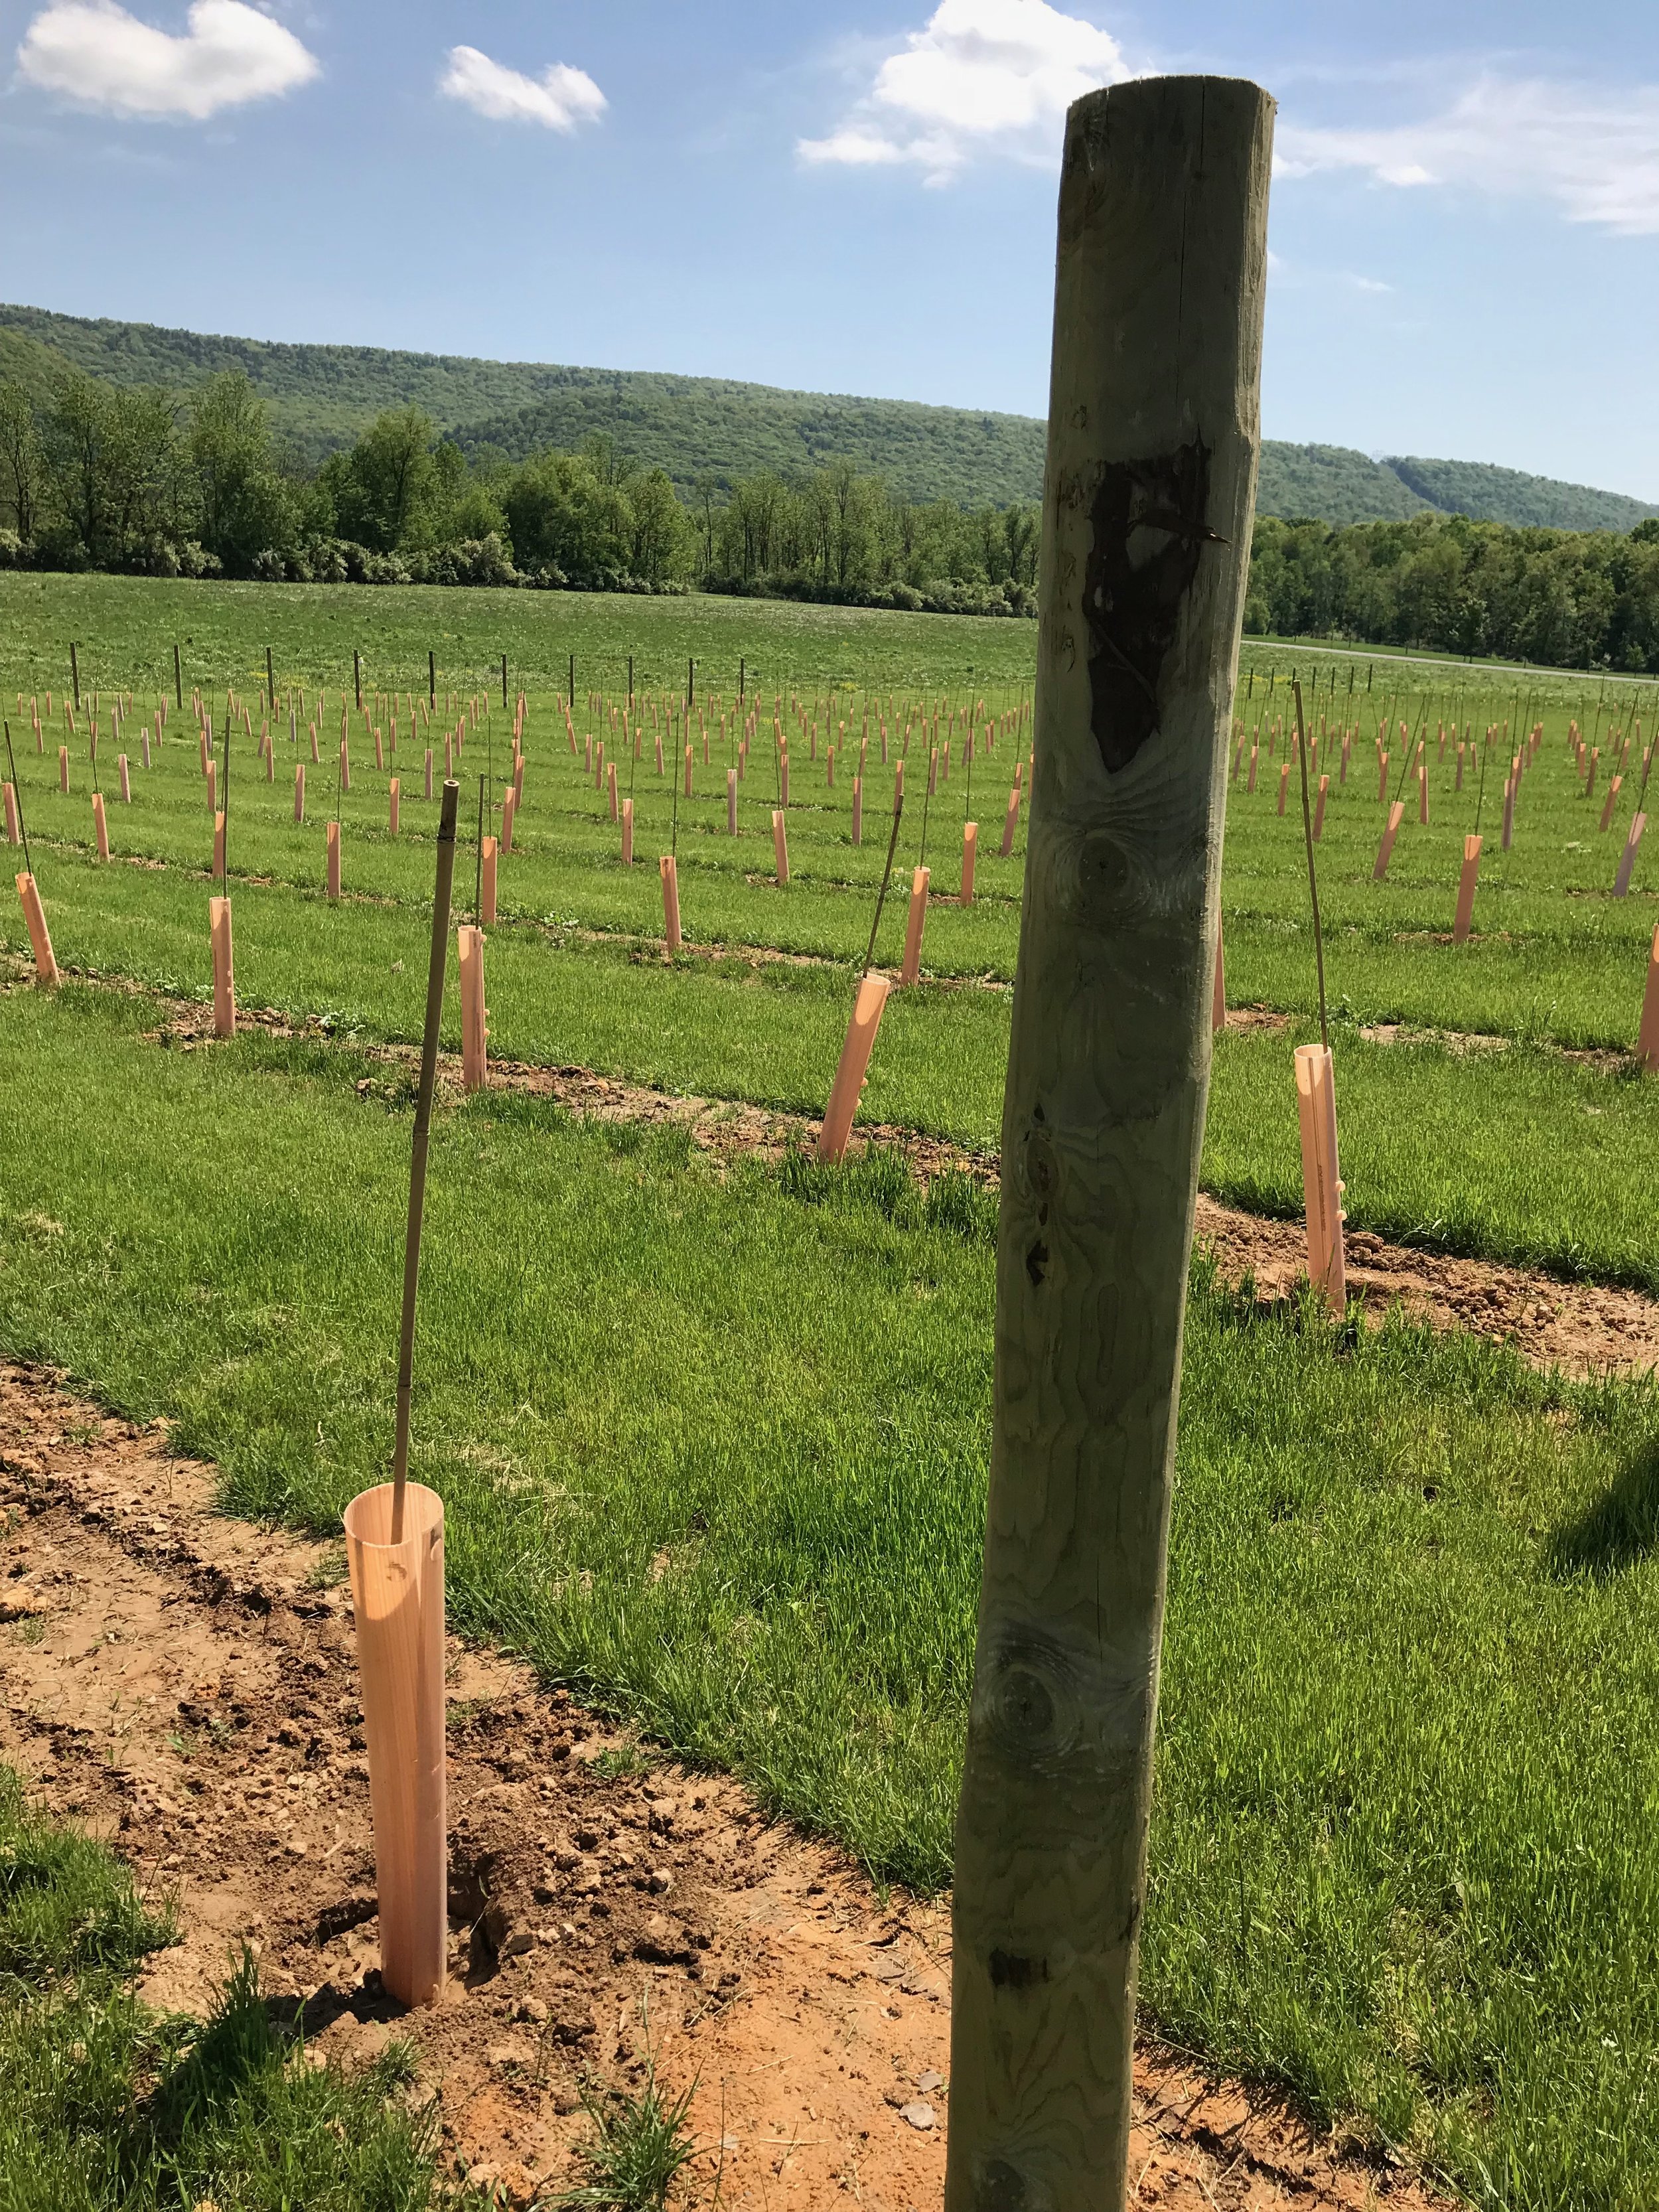   More vines planted.  